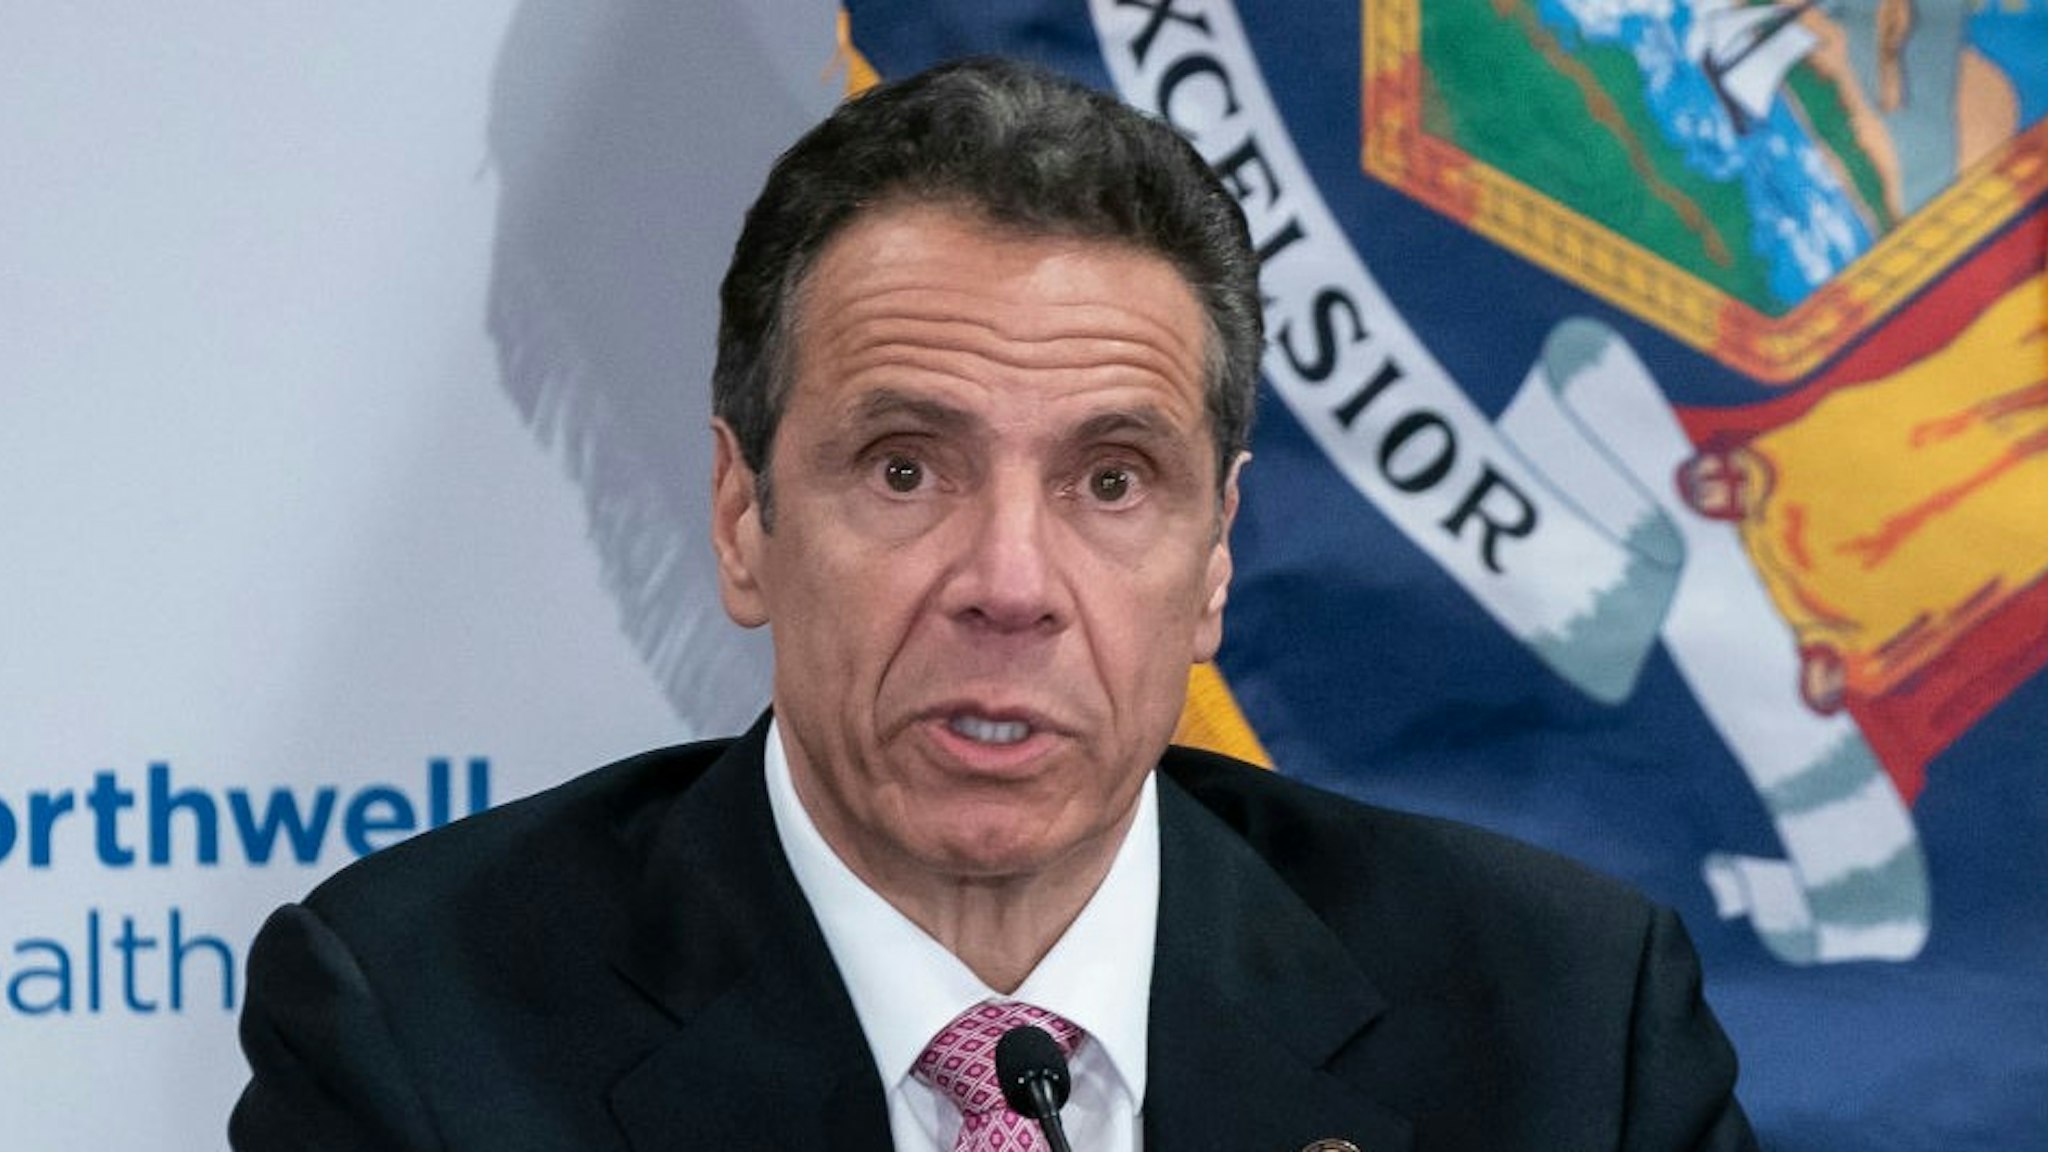 NEW YORK, UNITED STATES - MAY 06, 2020: Governor Andrew Cuomo speaks during a press conference of the Coronavirus briefing at Northwell Feinstein Institute For Medical Research in Manhasset.- PHOTOGRAPH BY Ron Adar / Echoes Wire/ Barcroft Studios / Future Publishing (Photo credit should read